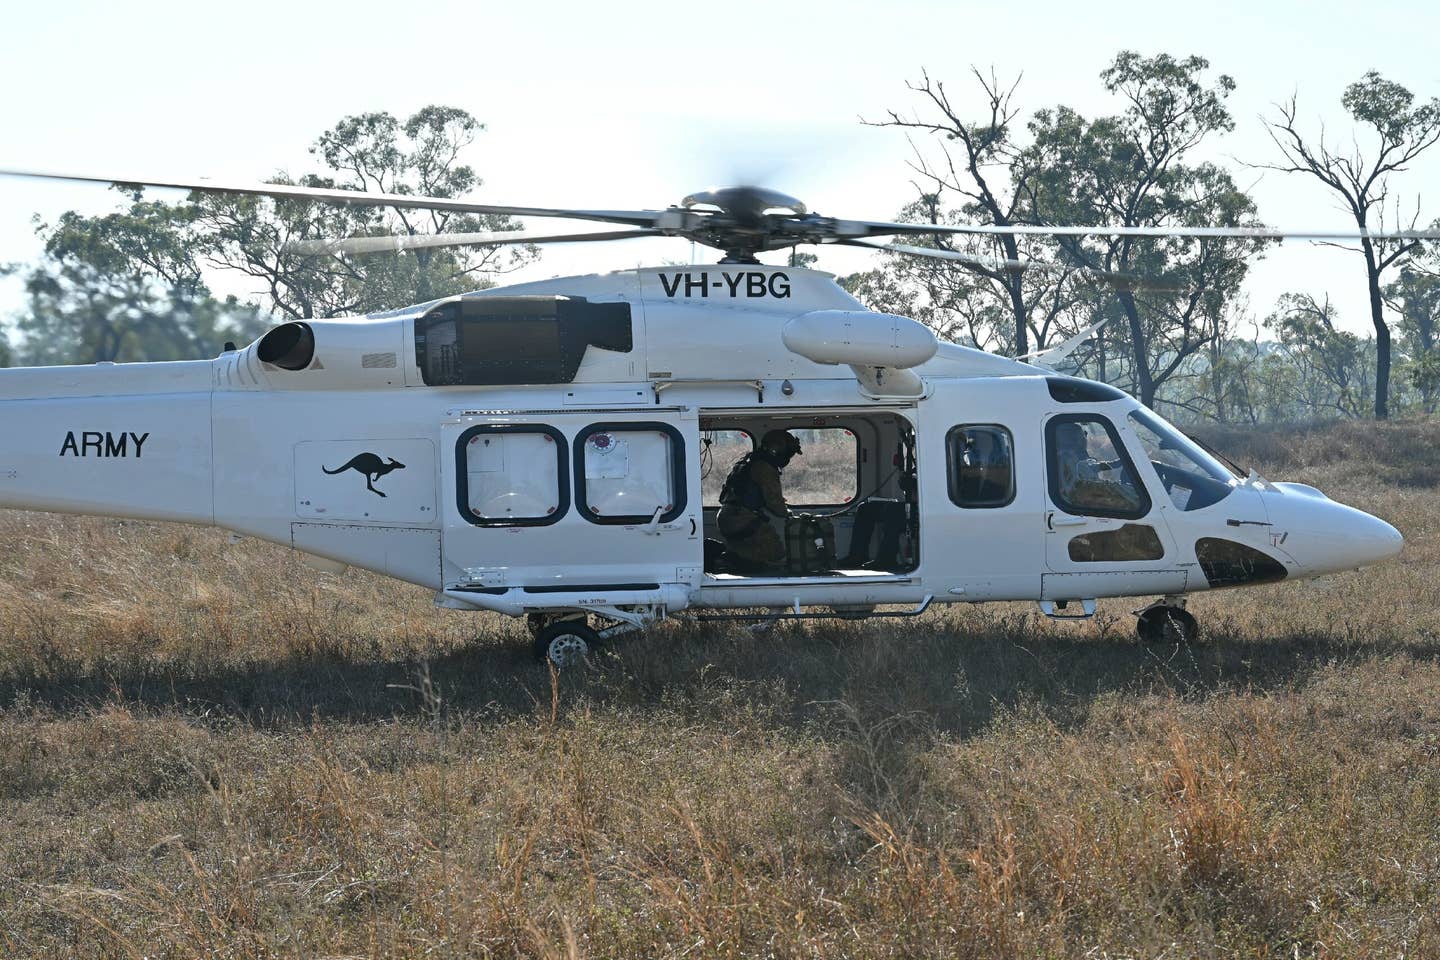 An AW139 helicopter serving with the 5th Aviation Regiment prepares to take off from Townsville Field Training Area, Queensland. These aircraft are leased from Helicorp and are flown by Australian Army aircrew. <em>COMMONWEALTH OF AUSTRALIA, DEPARTMENT OF DEFENSE</em>